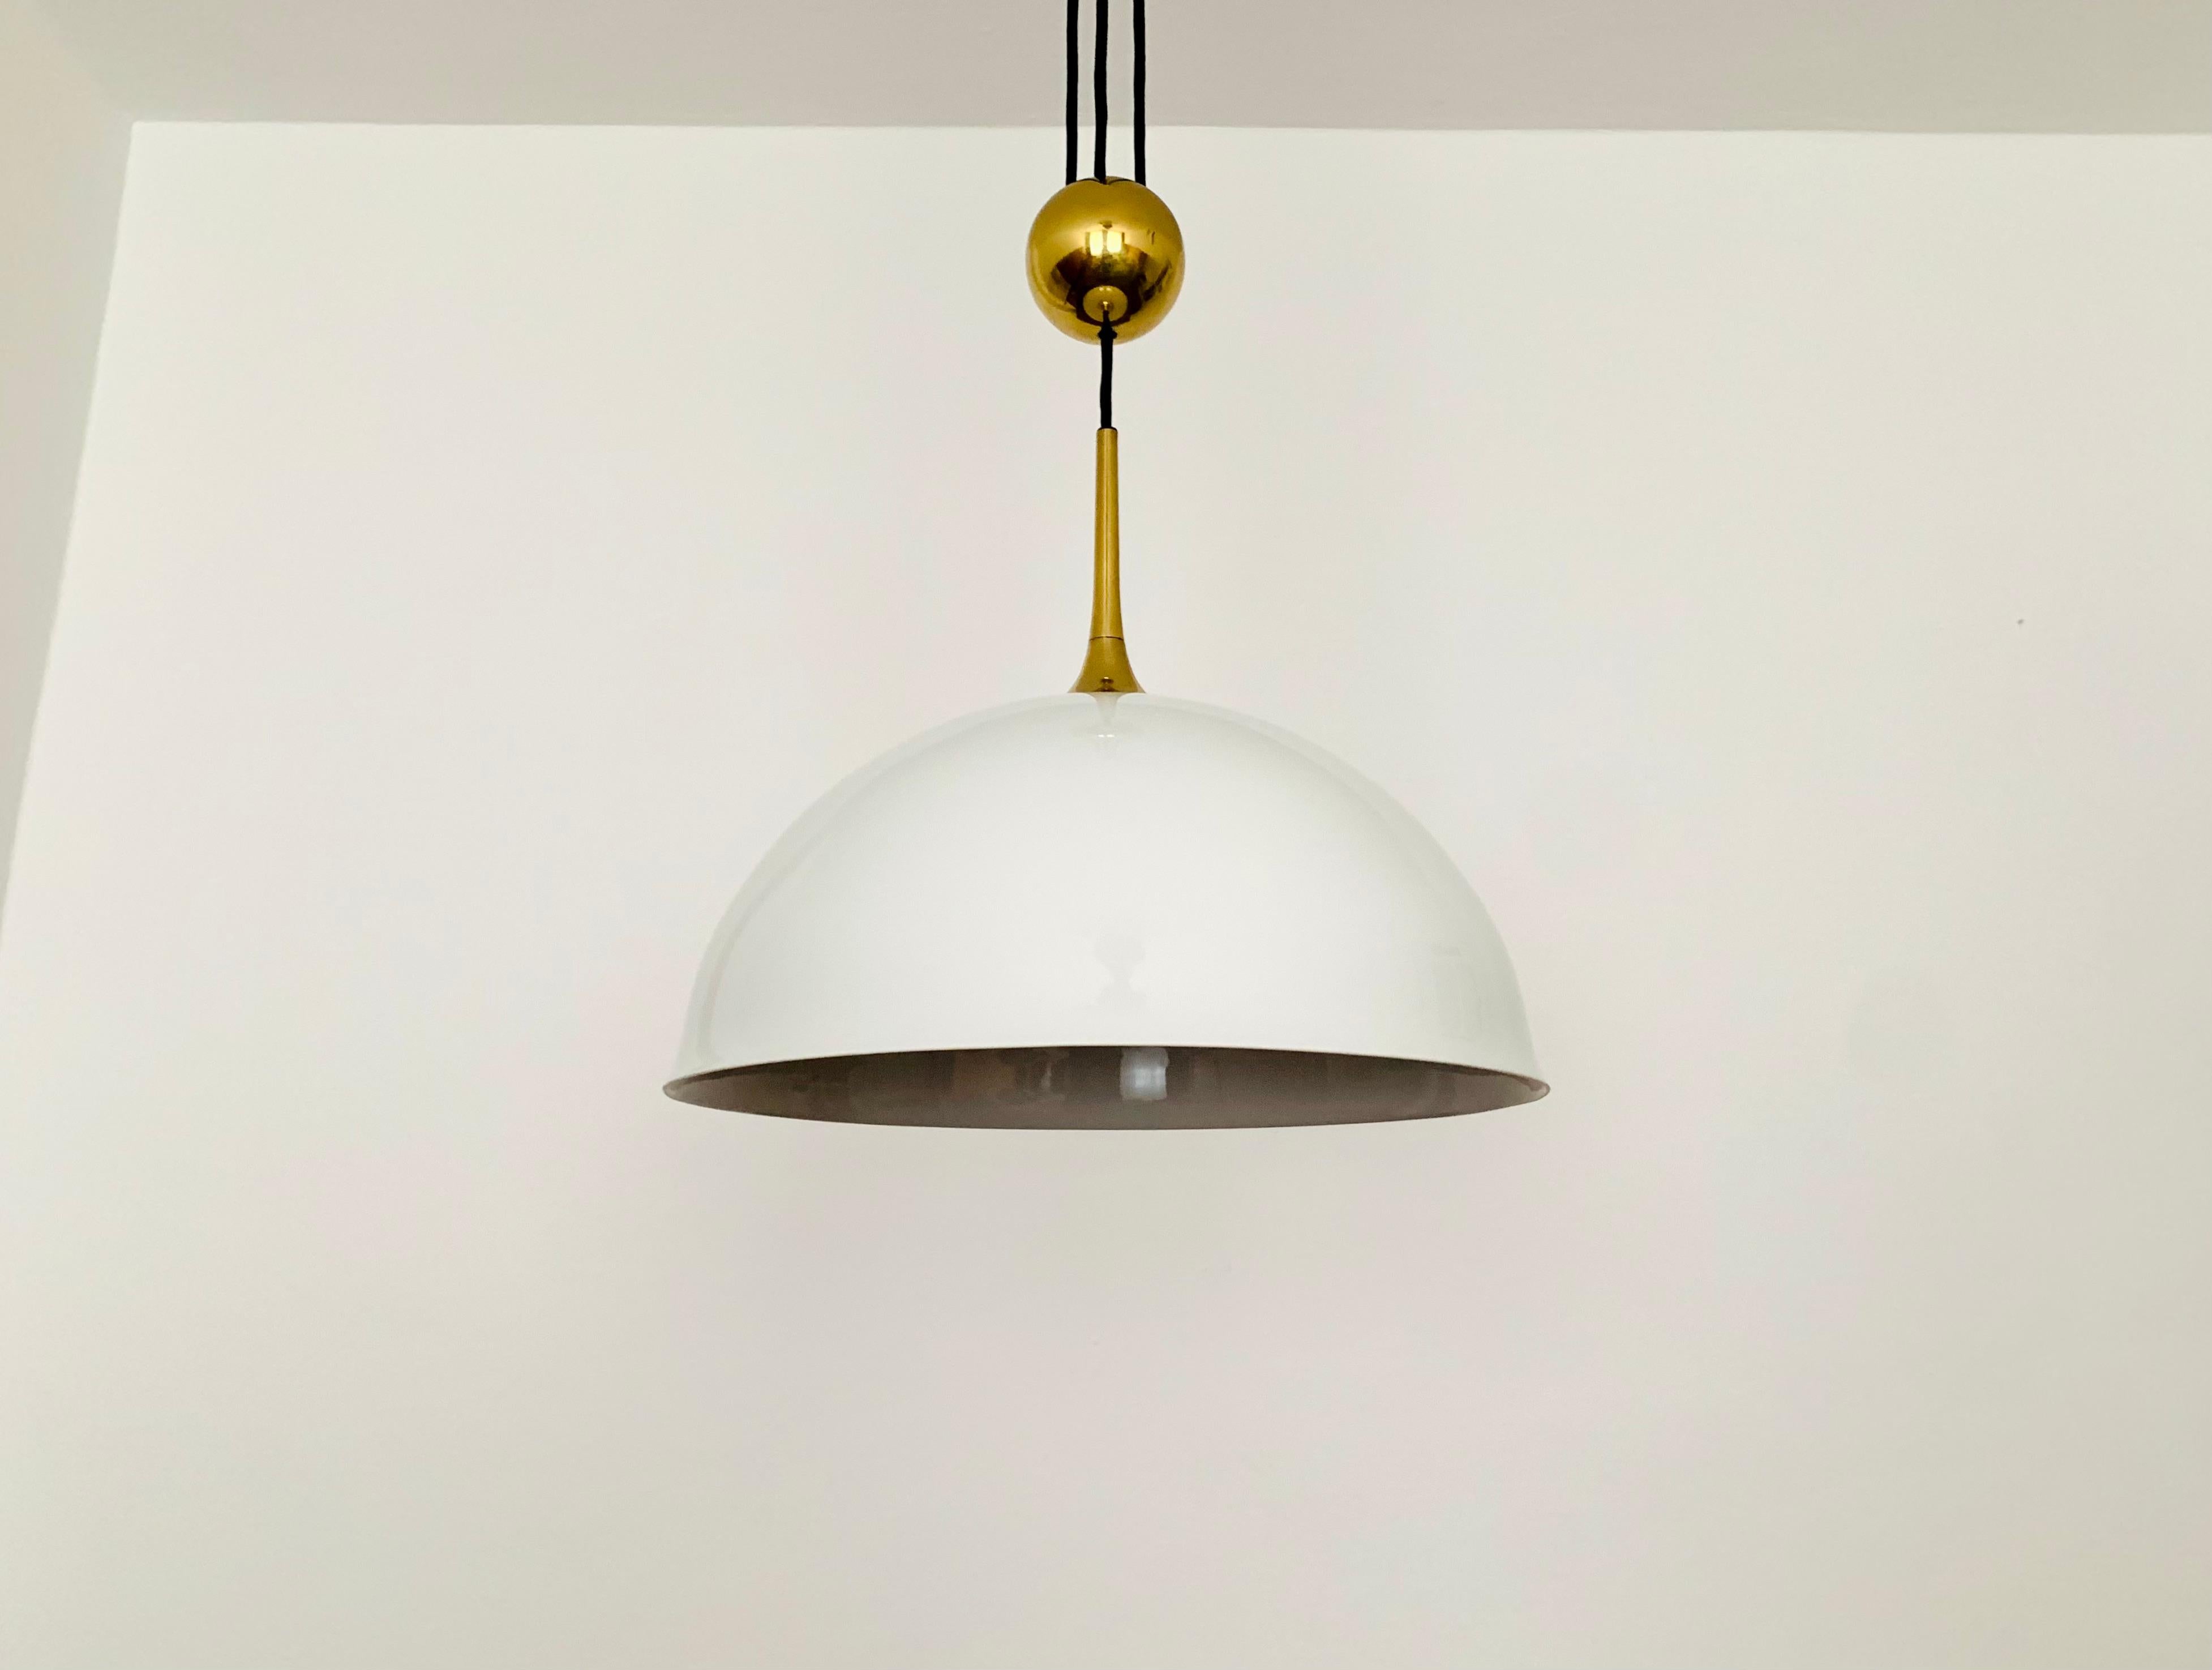 Very nice height-adjustable pendant lamp from the 1970s.
The lighting effect of the lamp is extremely beautiful.
The design and the very beautiful details create a very elegant and pleasant light.
The lamp creates a very cozy atmosphere and is very